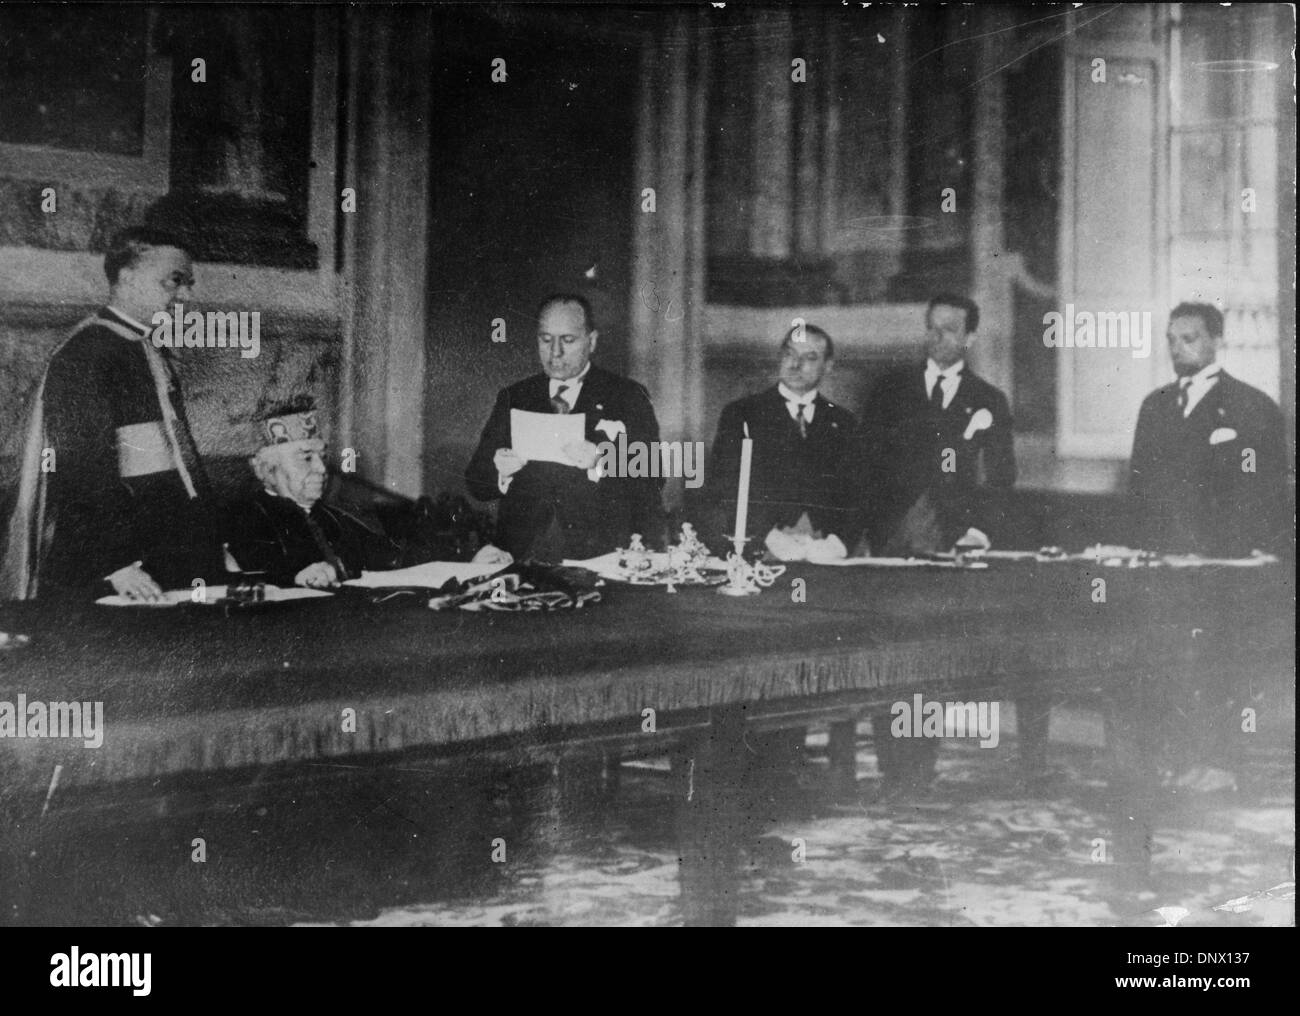 Nov. 1, 1929 - Rome, Italy - BENITO MUSSOLINI (1883-1945) the Italian dictator and leader of the Fascist movement attending a conference. (Credit Image: © KEYSTONE Pictures/ZUMAPRESS.com) Stock Photo